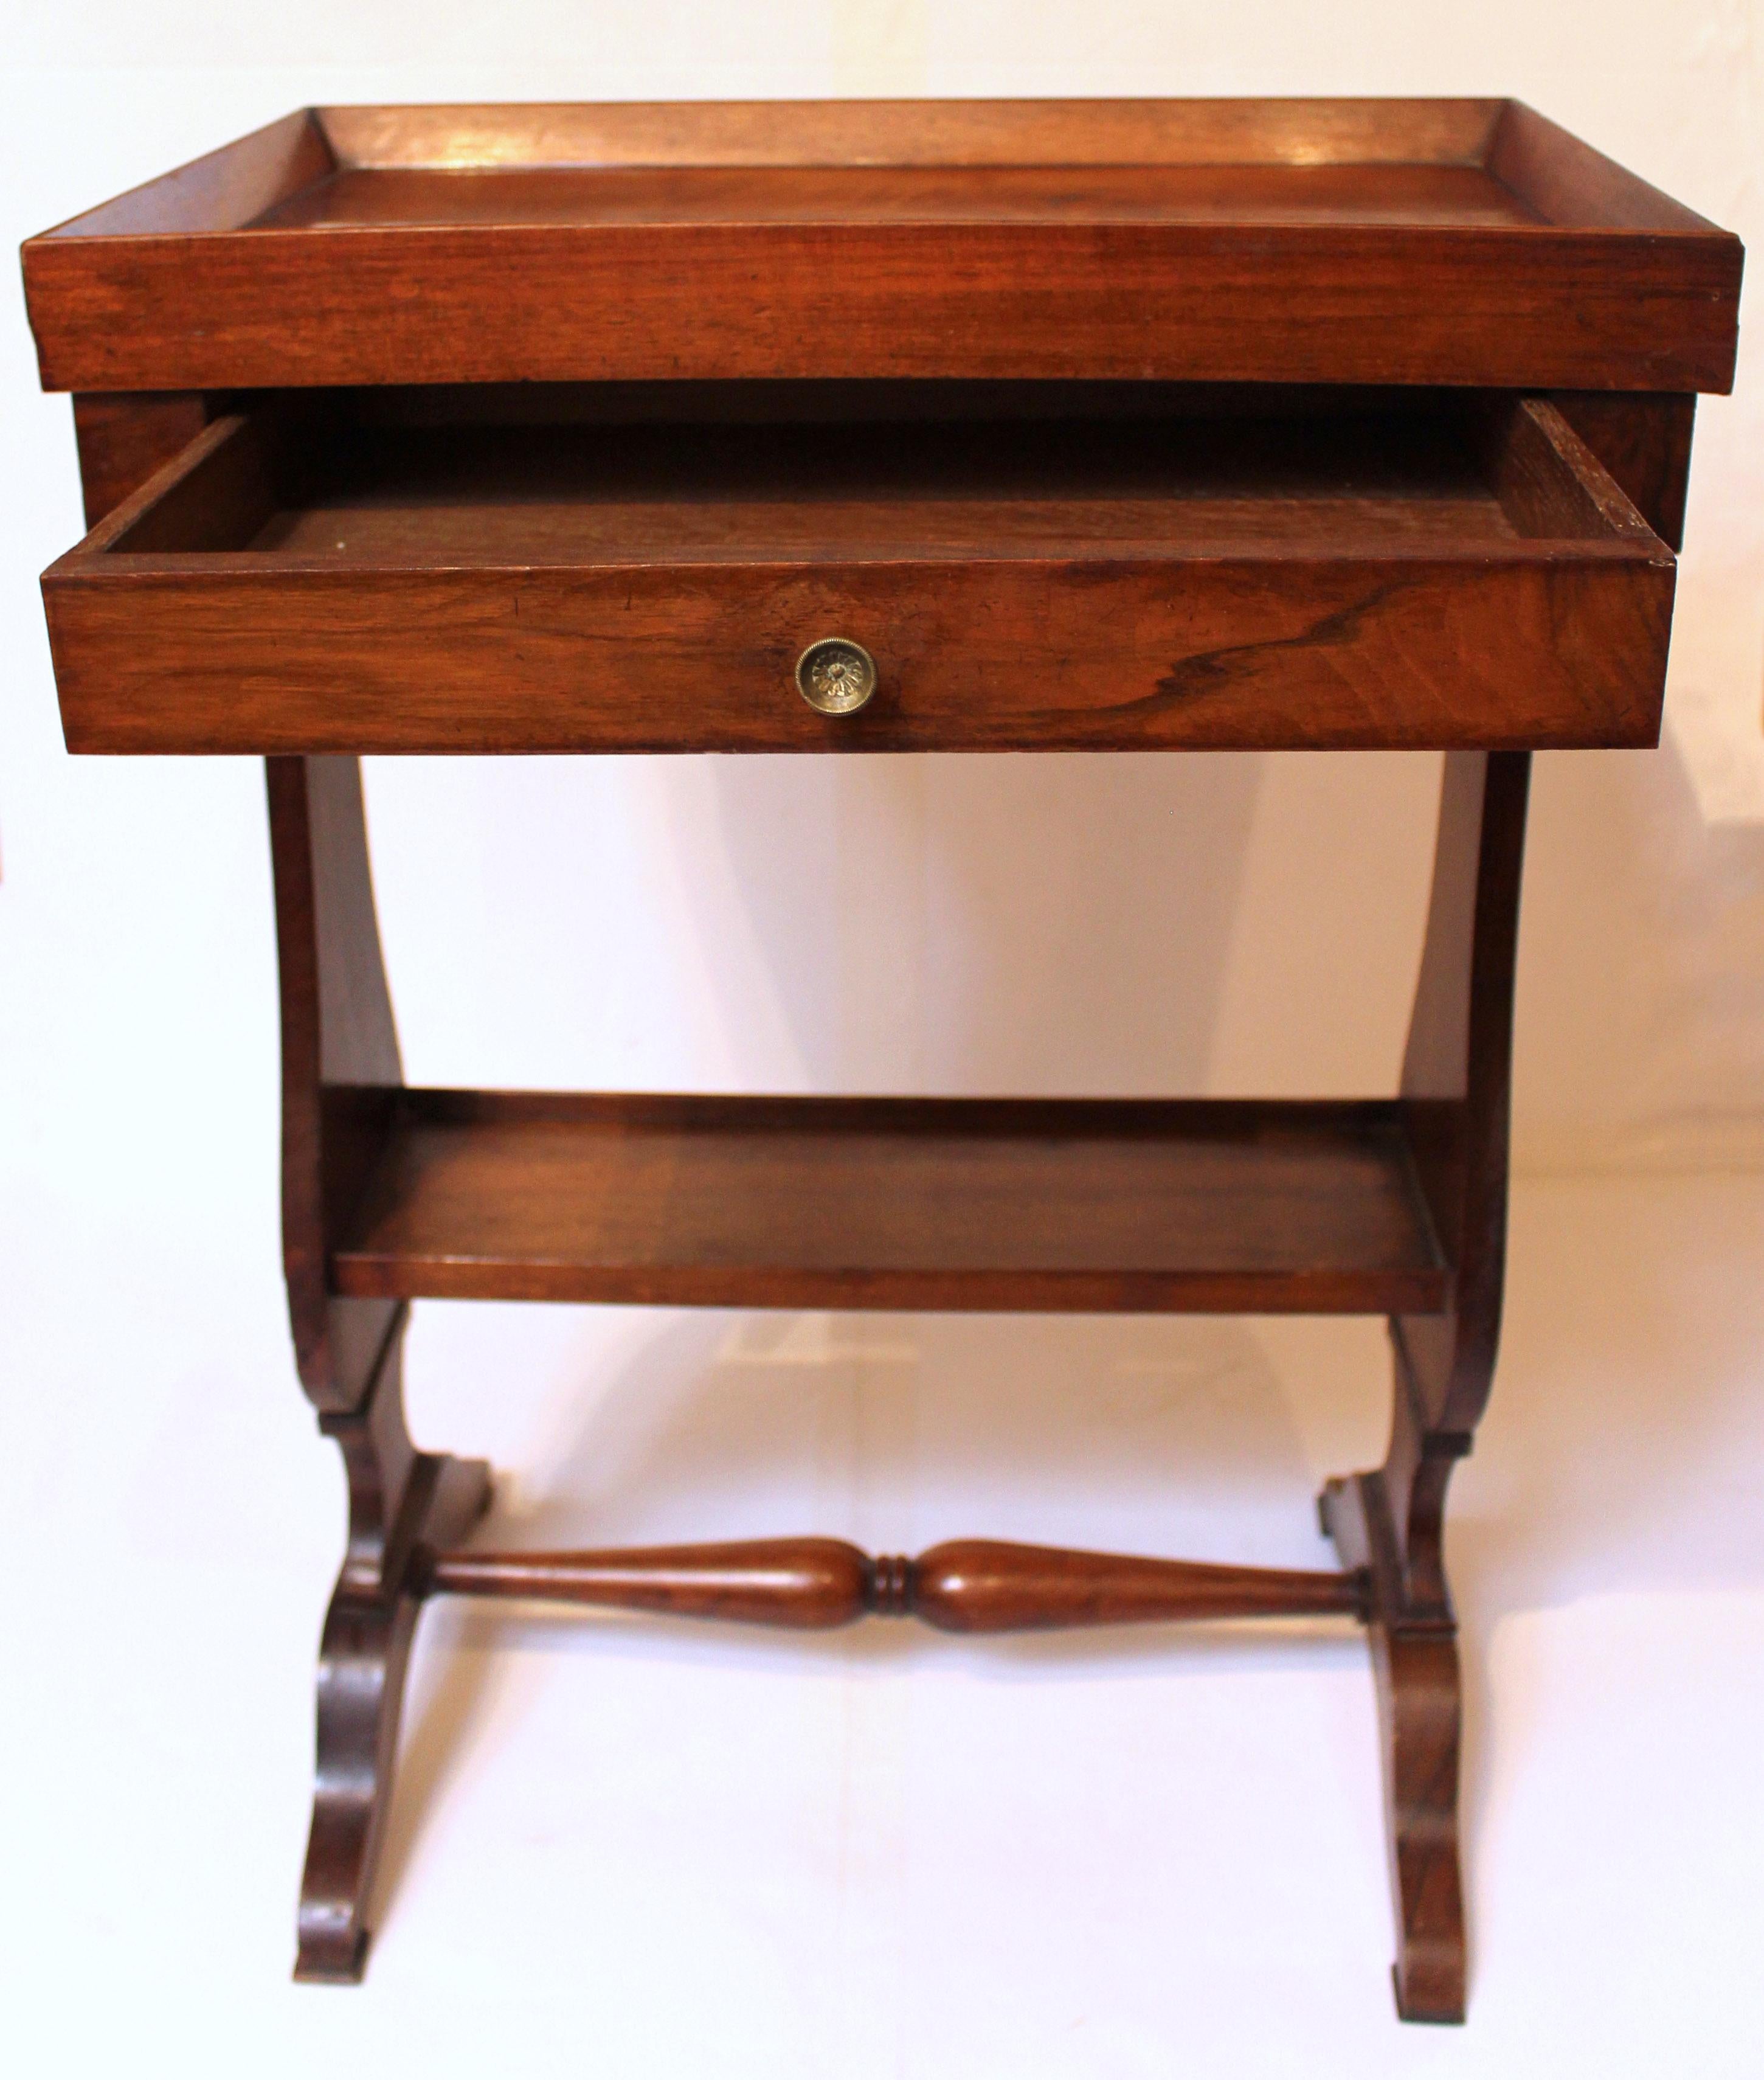 Circa 1840 Louis Philippe Side Table, French In Good Condition For Sale In Chapel Hill, NC